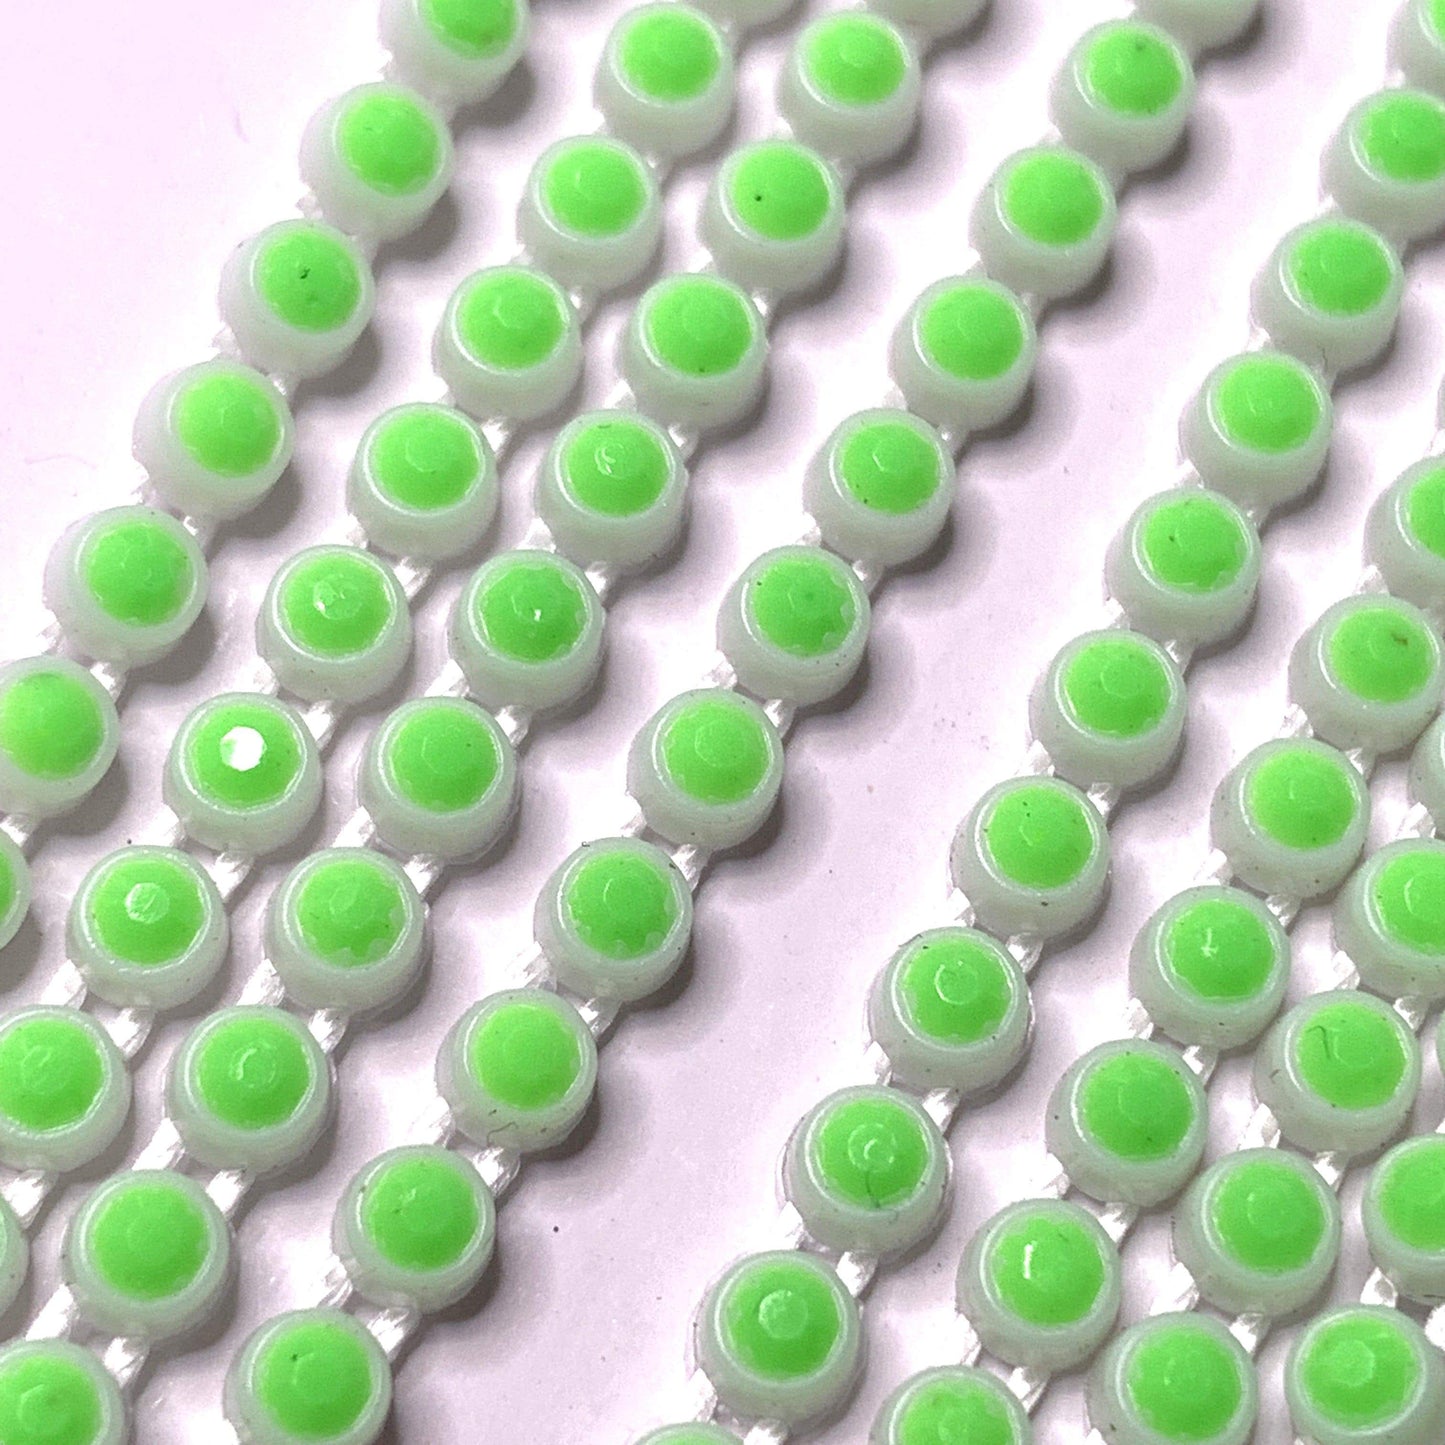 Sundaylace Creations & Bling Ss8 Plastic Rhinestone Banding Rope Ss8Plastic Rhinestone Chain Banding, Neon Gren Stone in White Plastic Rhinestone Chain, Sold in yard